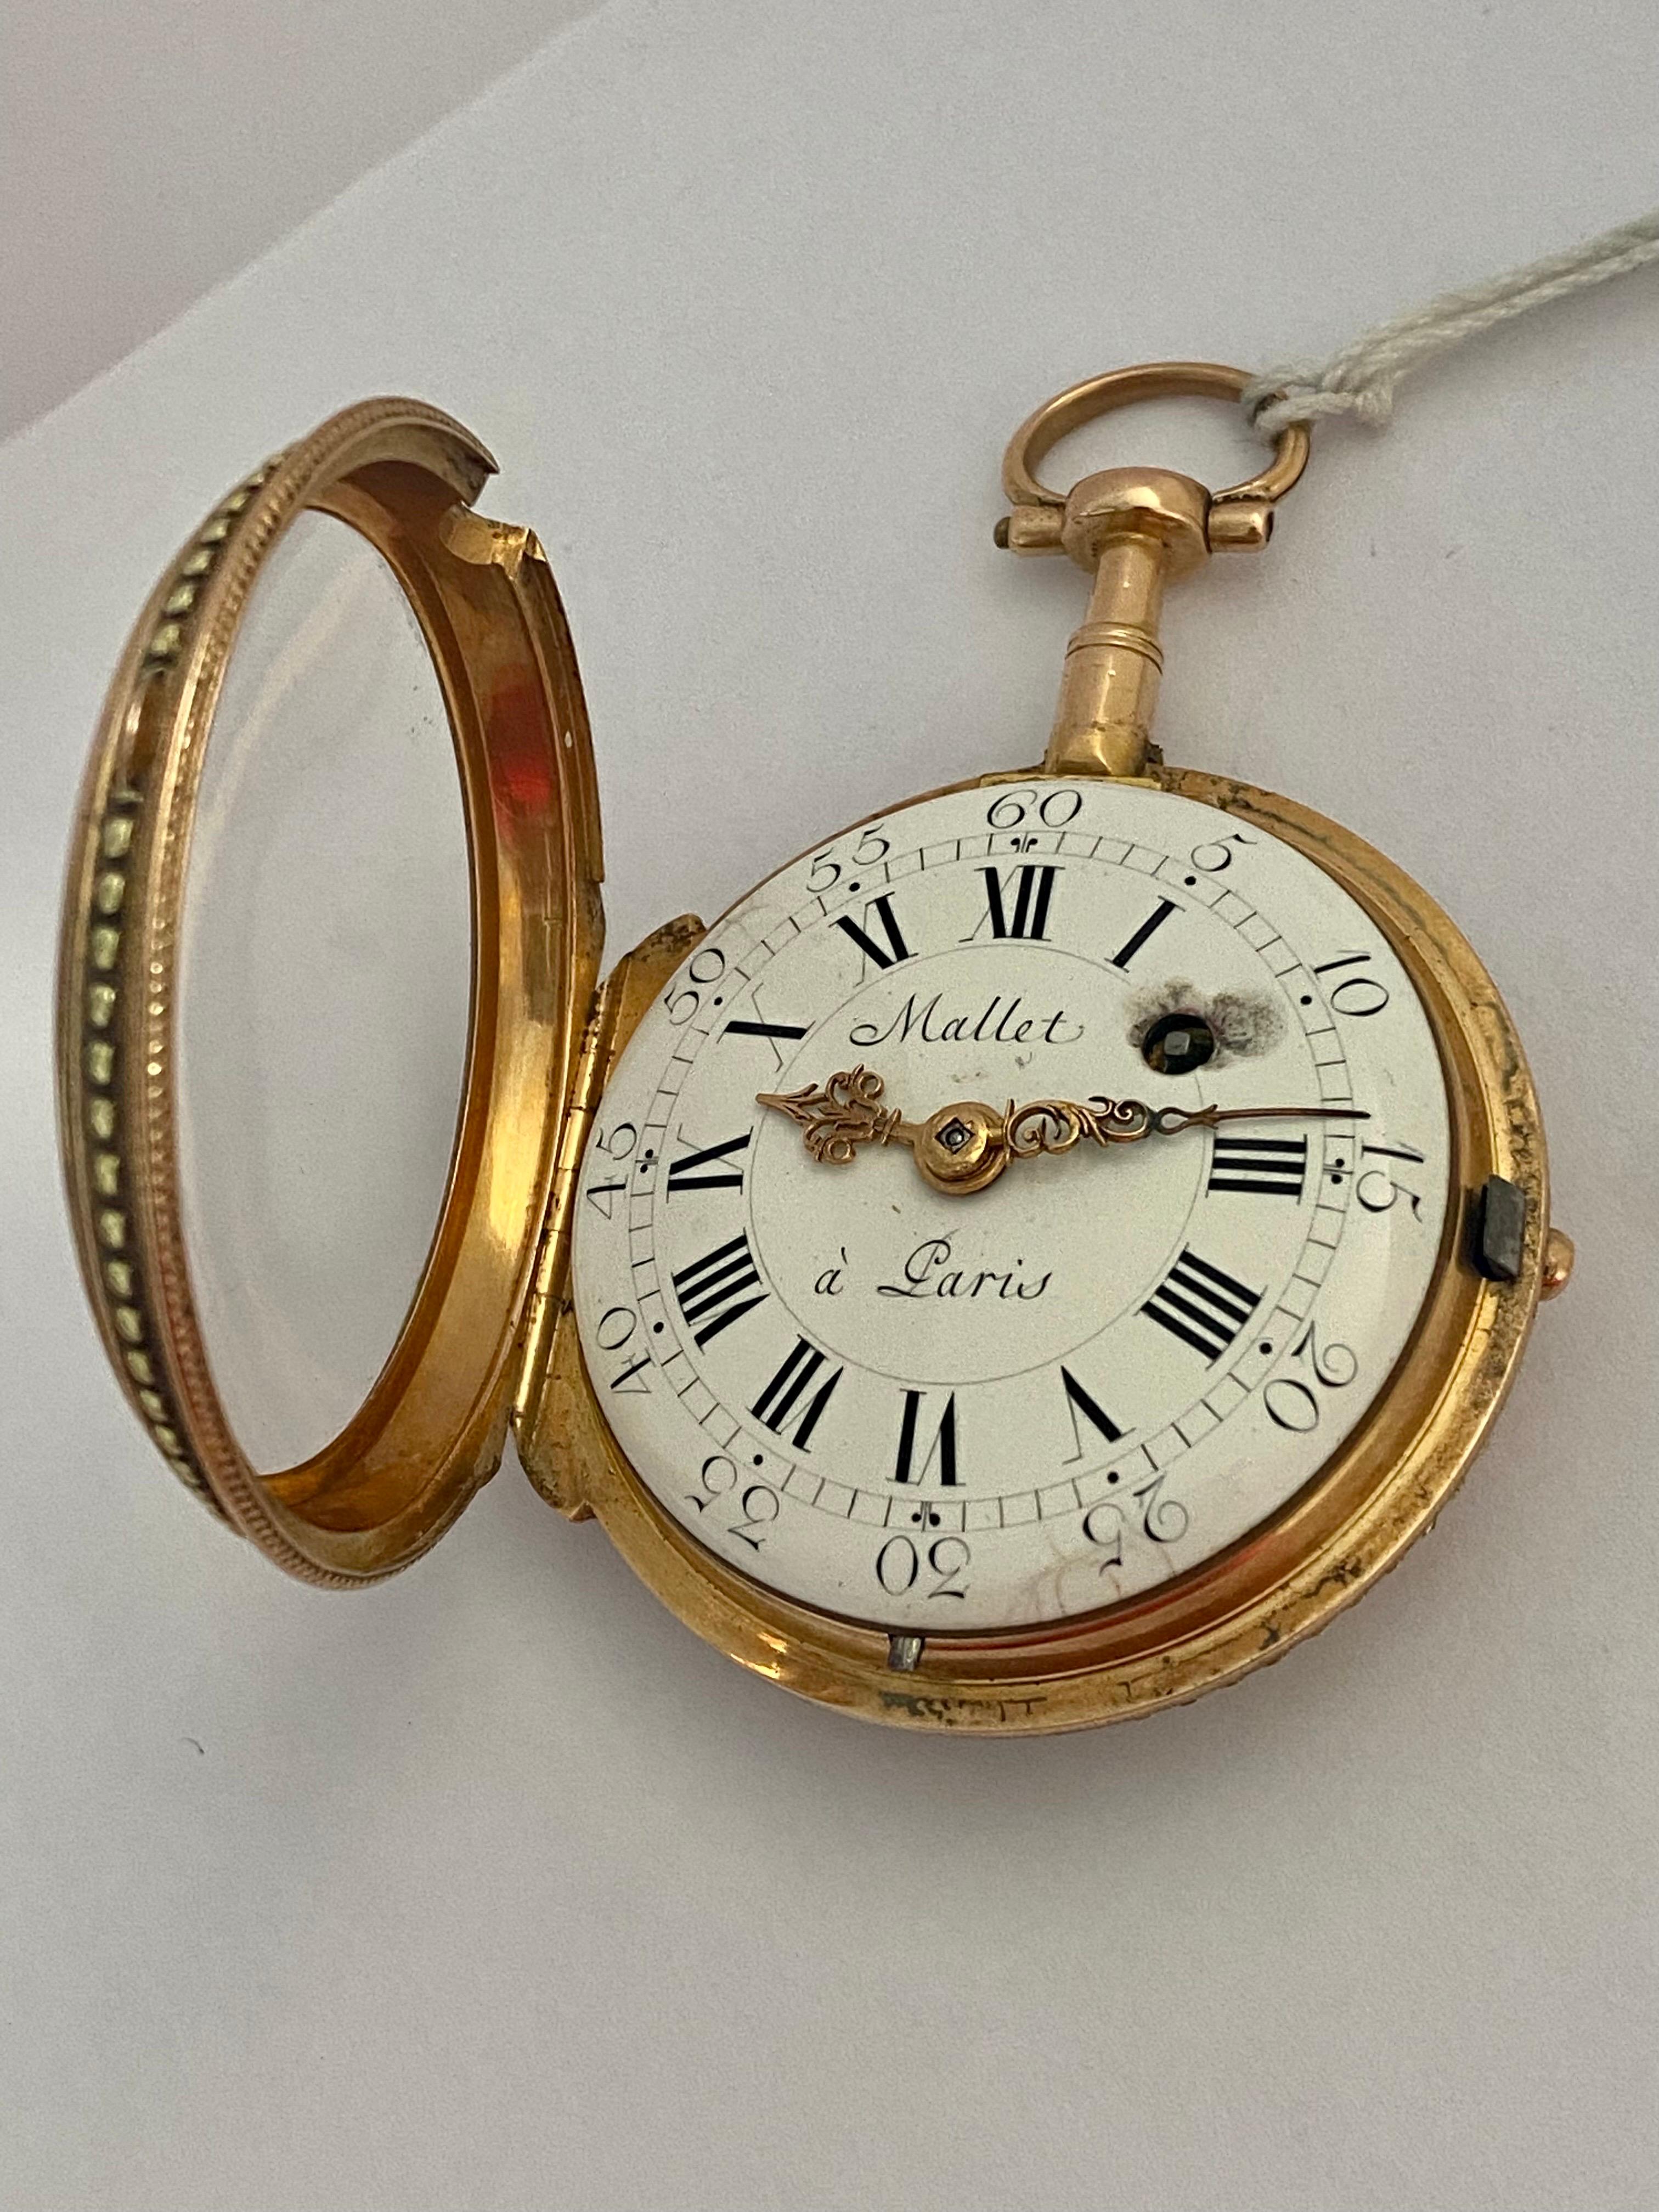 Rare & Early Verge Fusee 18 Karat Tri-Color Gold Pocket Watch by Mallet a Paris In Fair Condition For Sale In Carlisle, GB